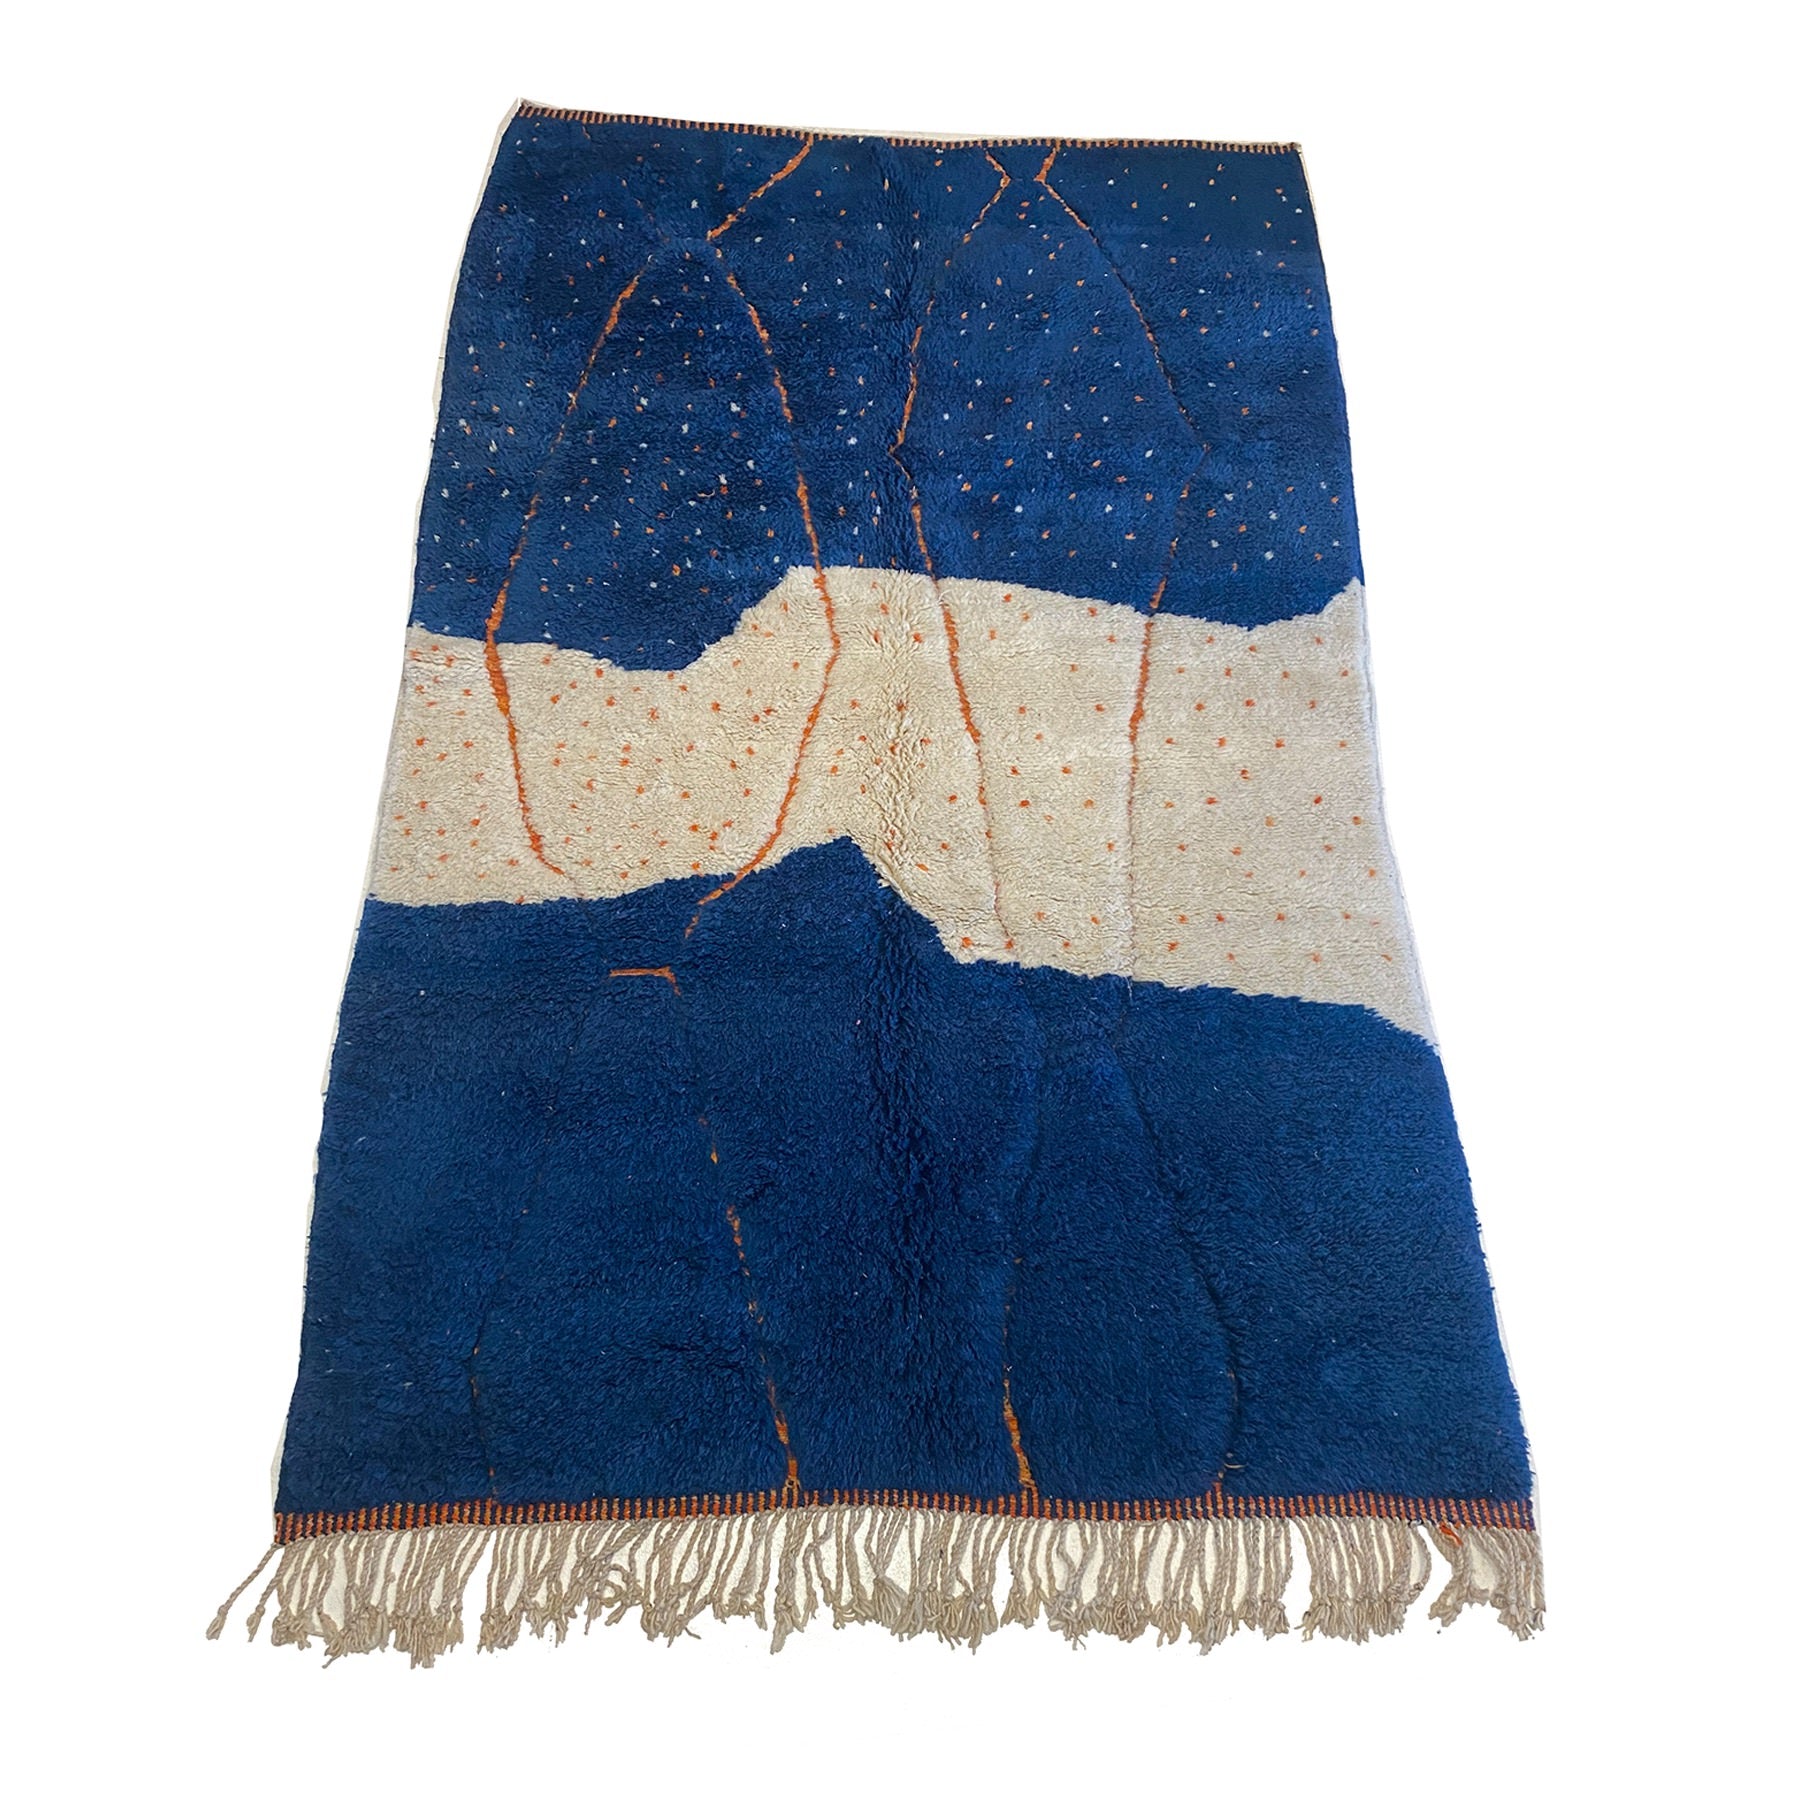 Blue and white Moroccan Moroccan area rug with orange details - Kantara | Moroccan Rugs